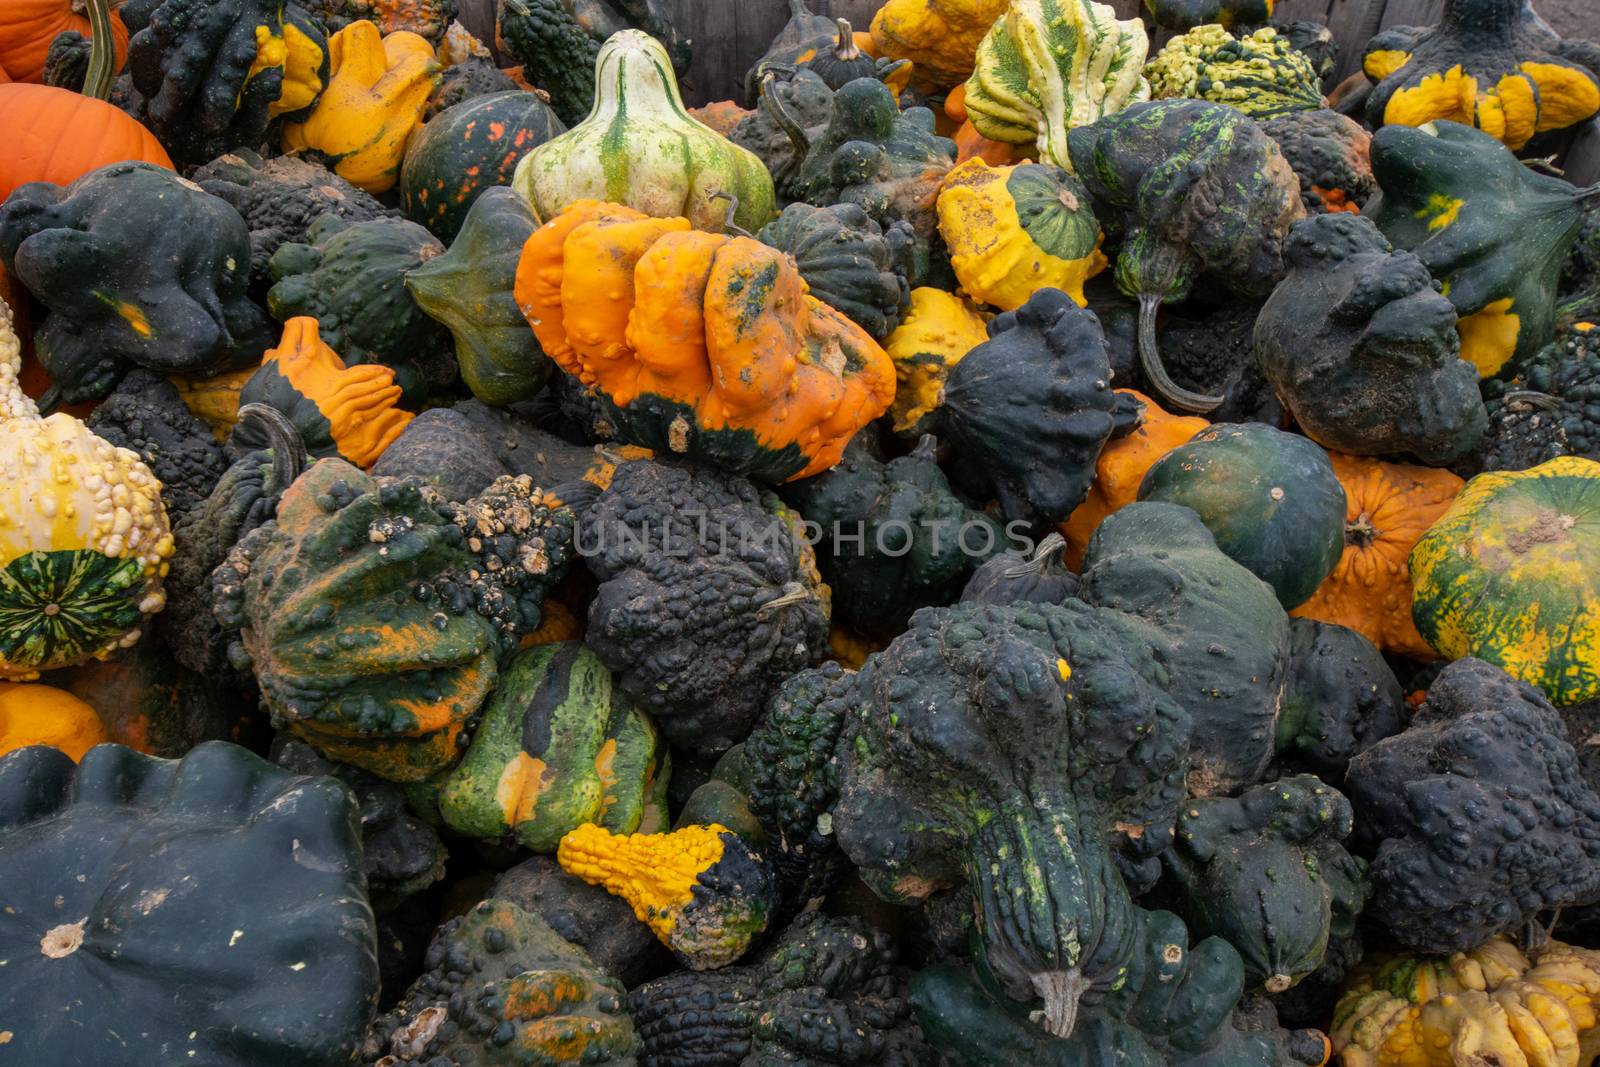 Ugly Pumpkins and Squash in Various Colors in a Pile Filling the by bju12290